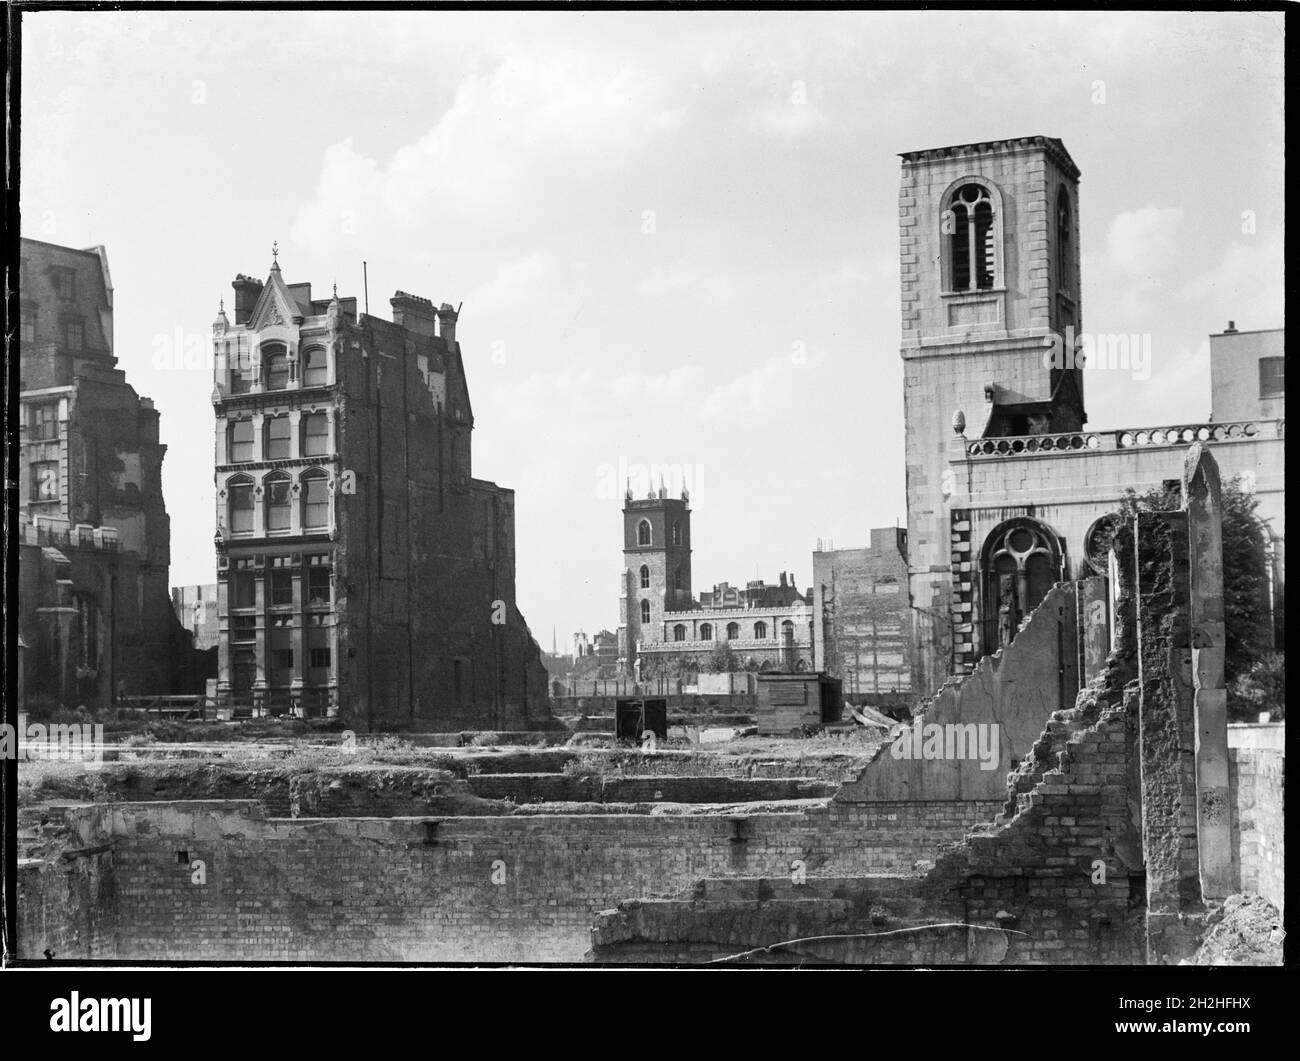 St Giles' Cripplegate, Fore Street, City and County of the City of London, Greater London Authority, 1941-1945. A view looking north-west across a bomb damaged landscape towards St Giles' Cripplegate Church in the distance with St Mary Aldermanbury on the right of the foreground. St Mary Aldermanbury which was rebuilt by Christopher Wren after the Great Fire of London in 1666 was later gutted by fire during the Blitz in 1940. The remains of the walls were removed and rebuilt in Fulton, Missouri in 1966 as a memorial to Winston Churchill, although the footings of the church remain on the origin Stock Photo